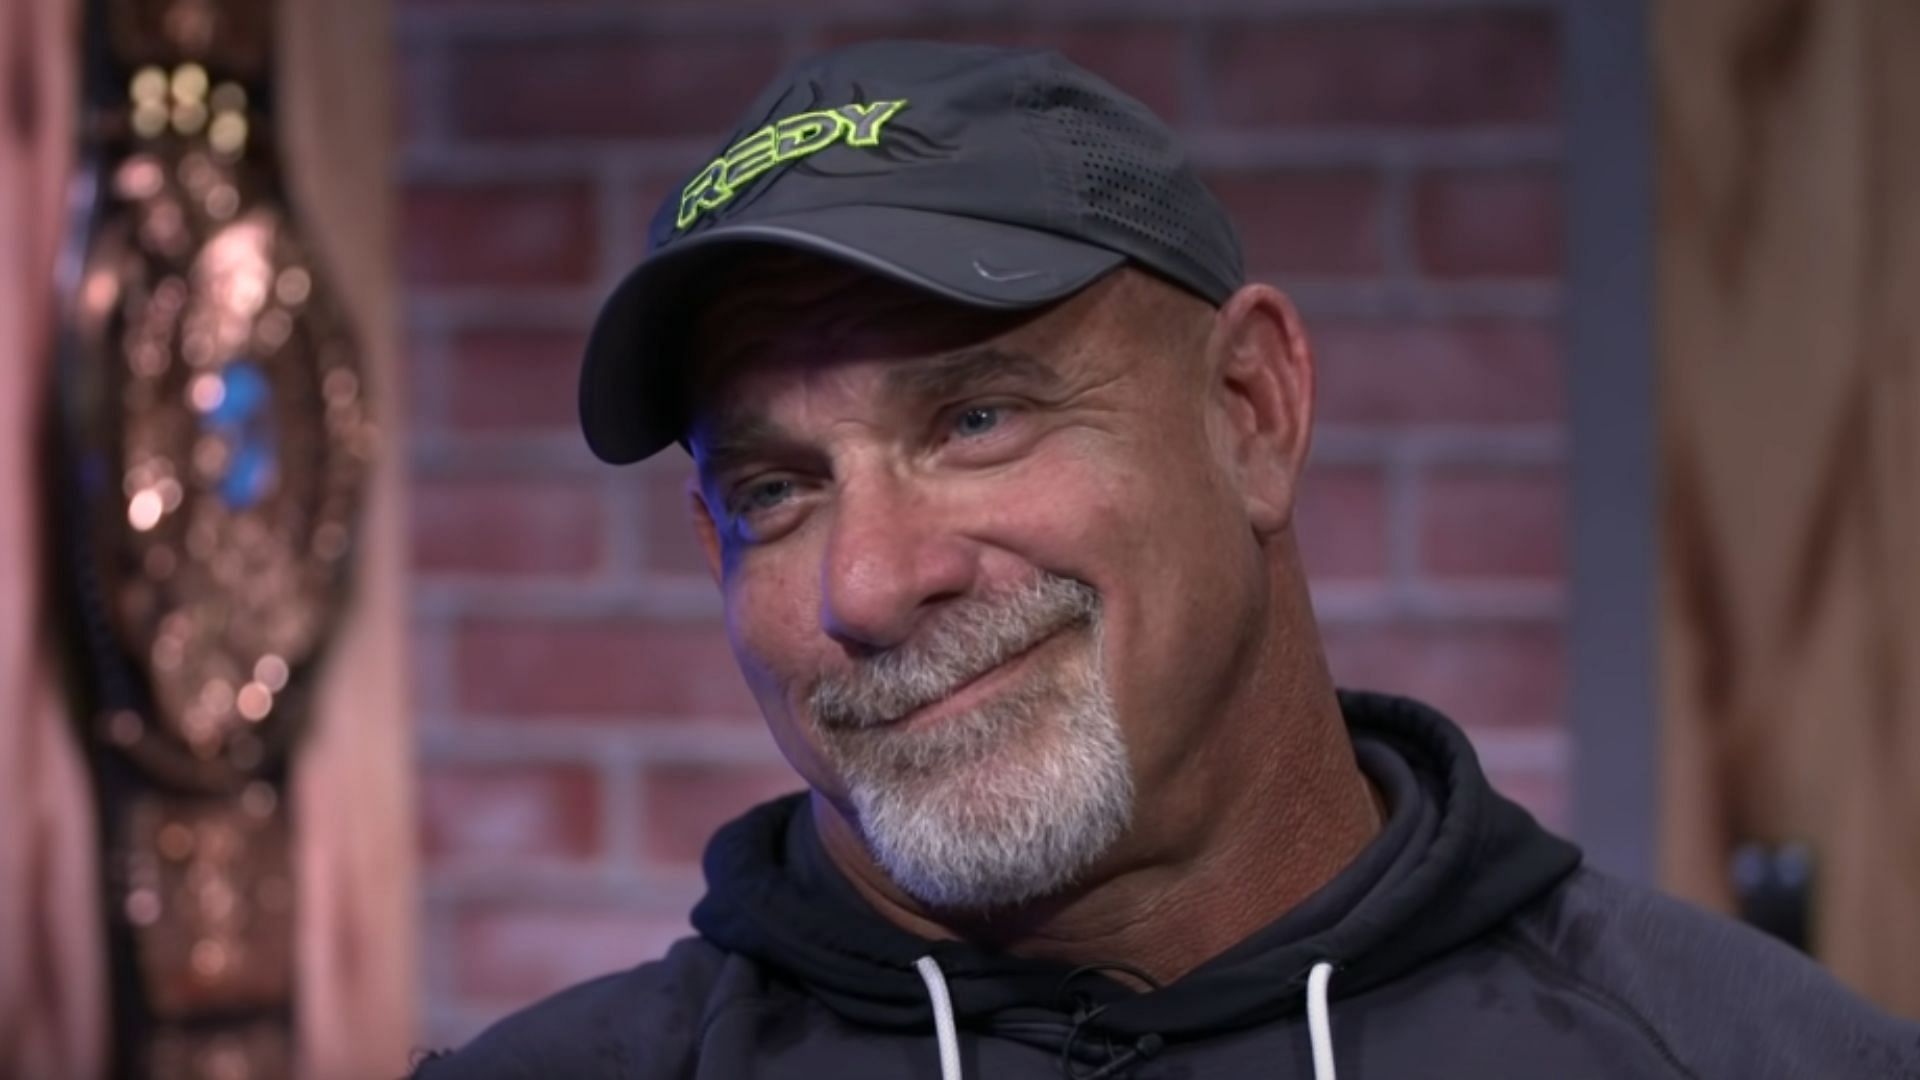 Goldberg worked for WCW between 1996 and 2001.